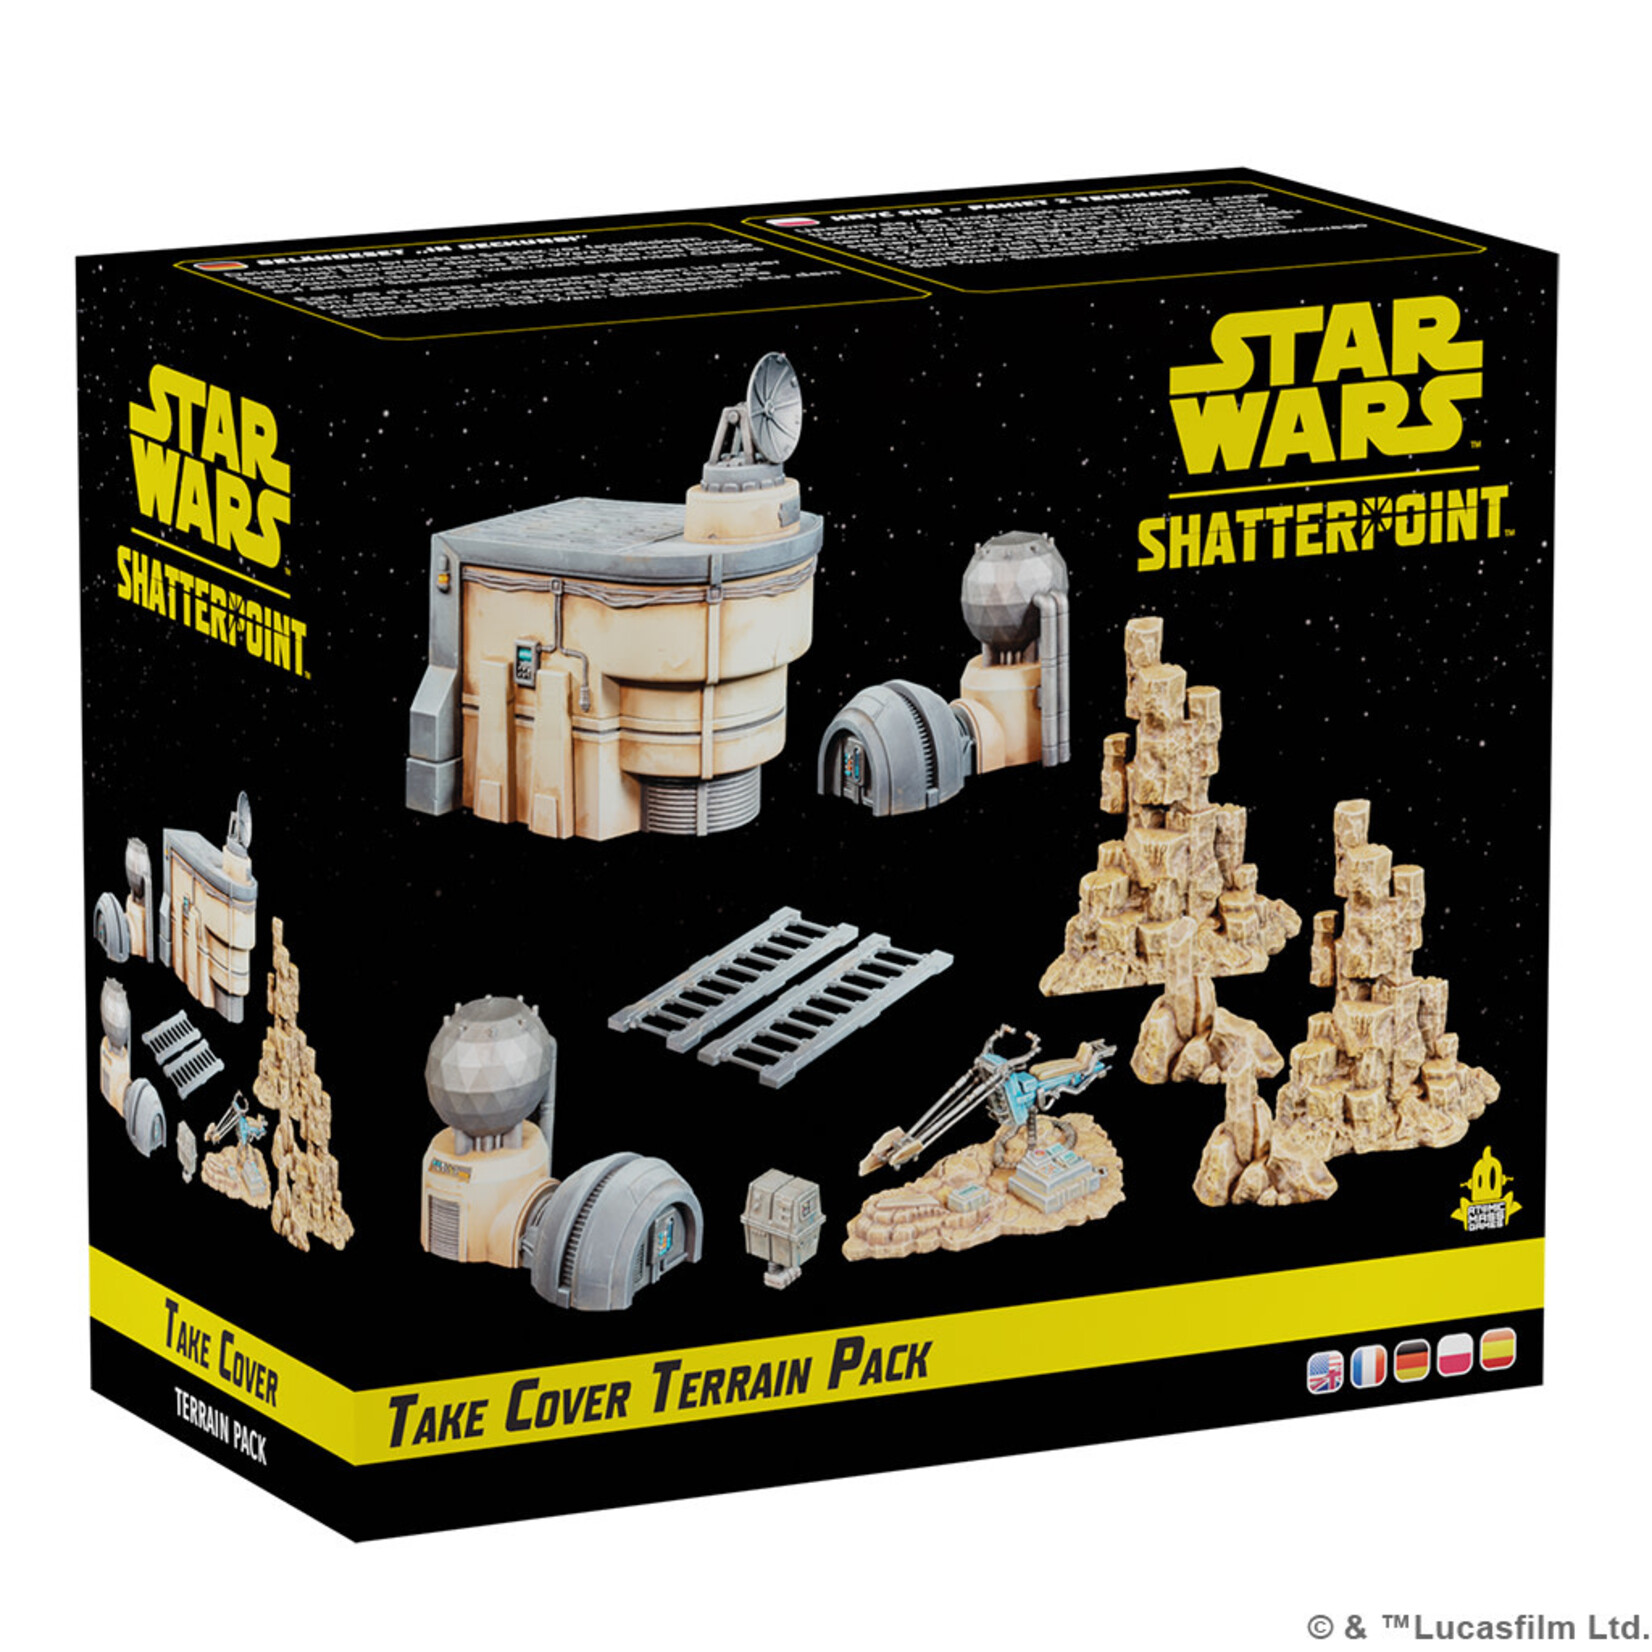 Star Wars Star Wars: Shatterpoint – Take Cover Terrain Pack (Expansion)